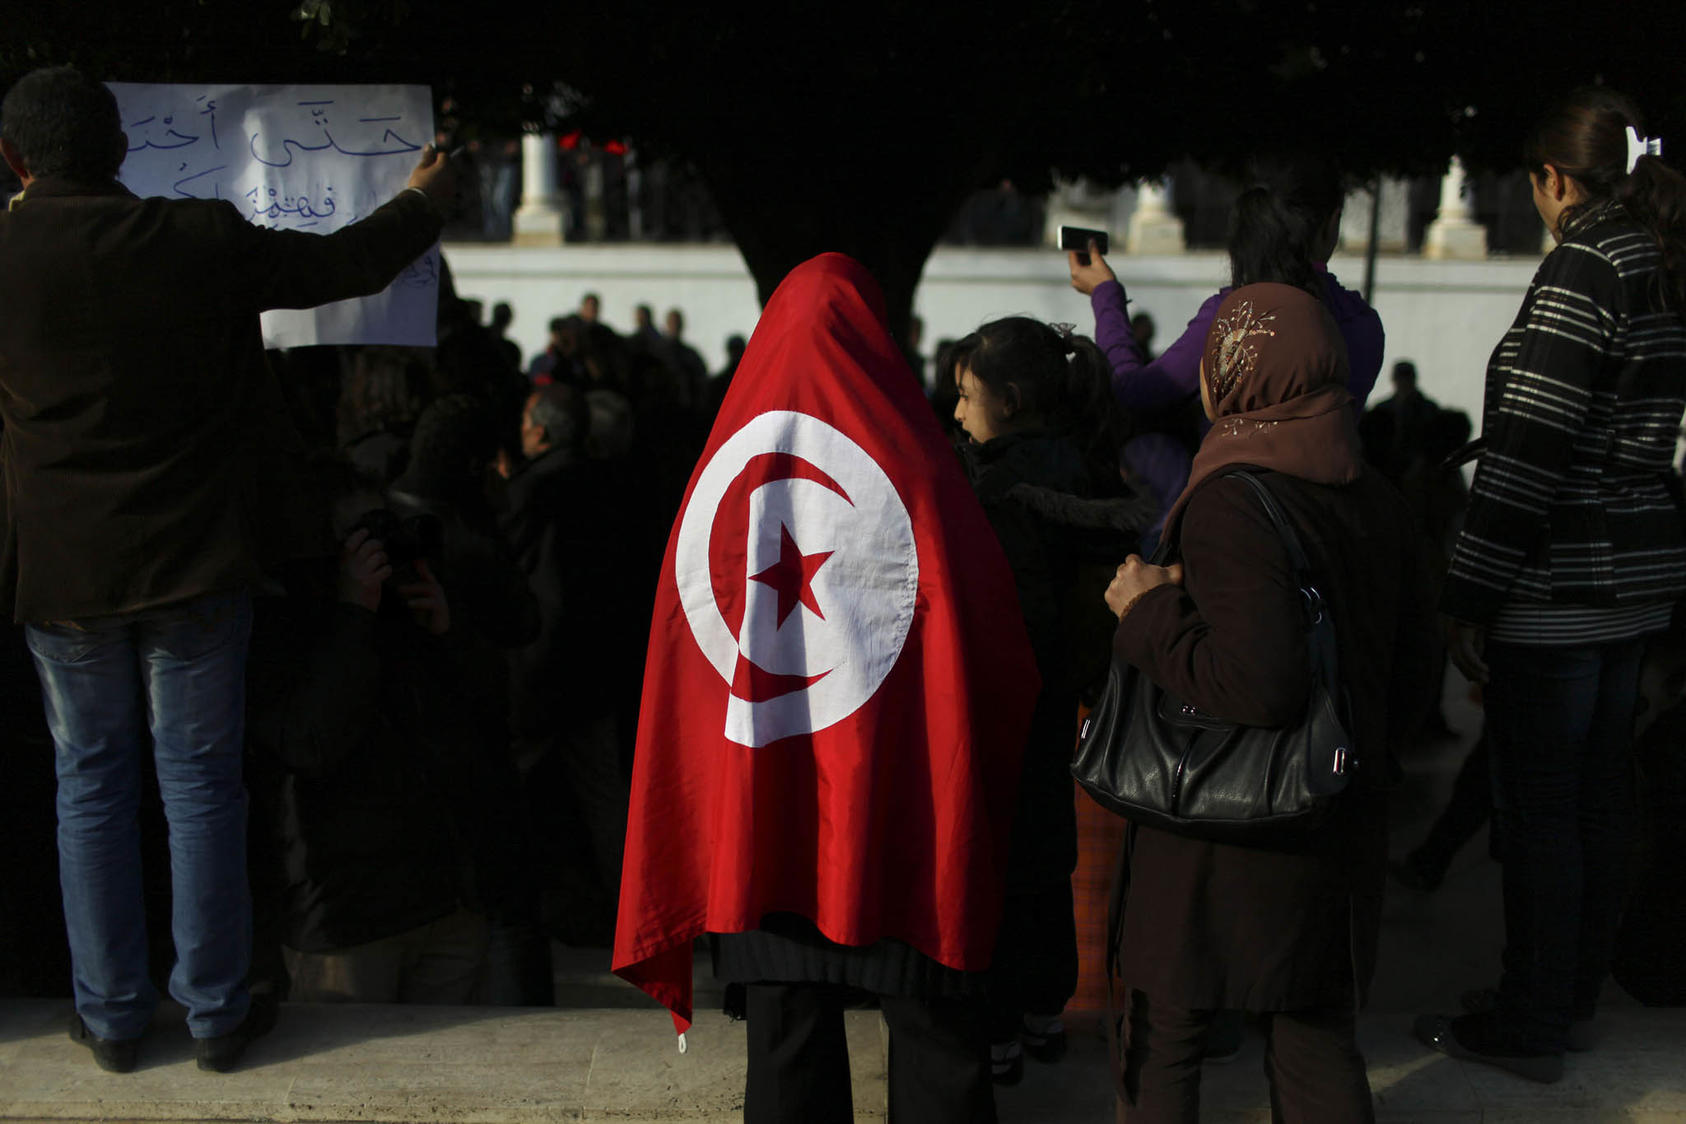 A woman wears a Tunisian flag during a protest outside a government building in Tunis, Tunisia. January 21, 2011. (Holly Pickett/The New York Times)